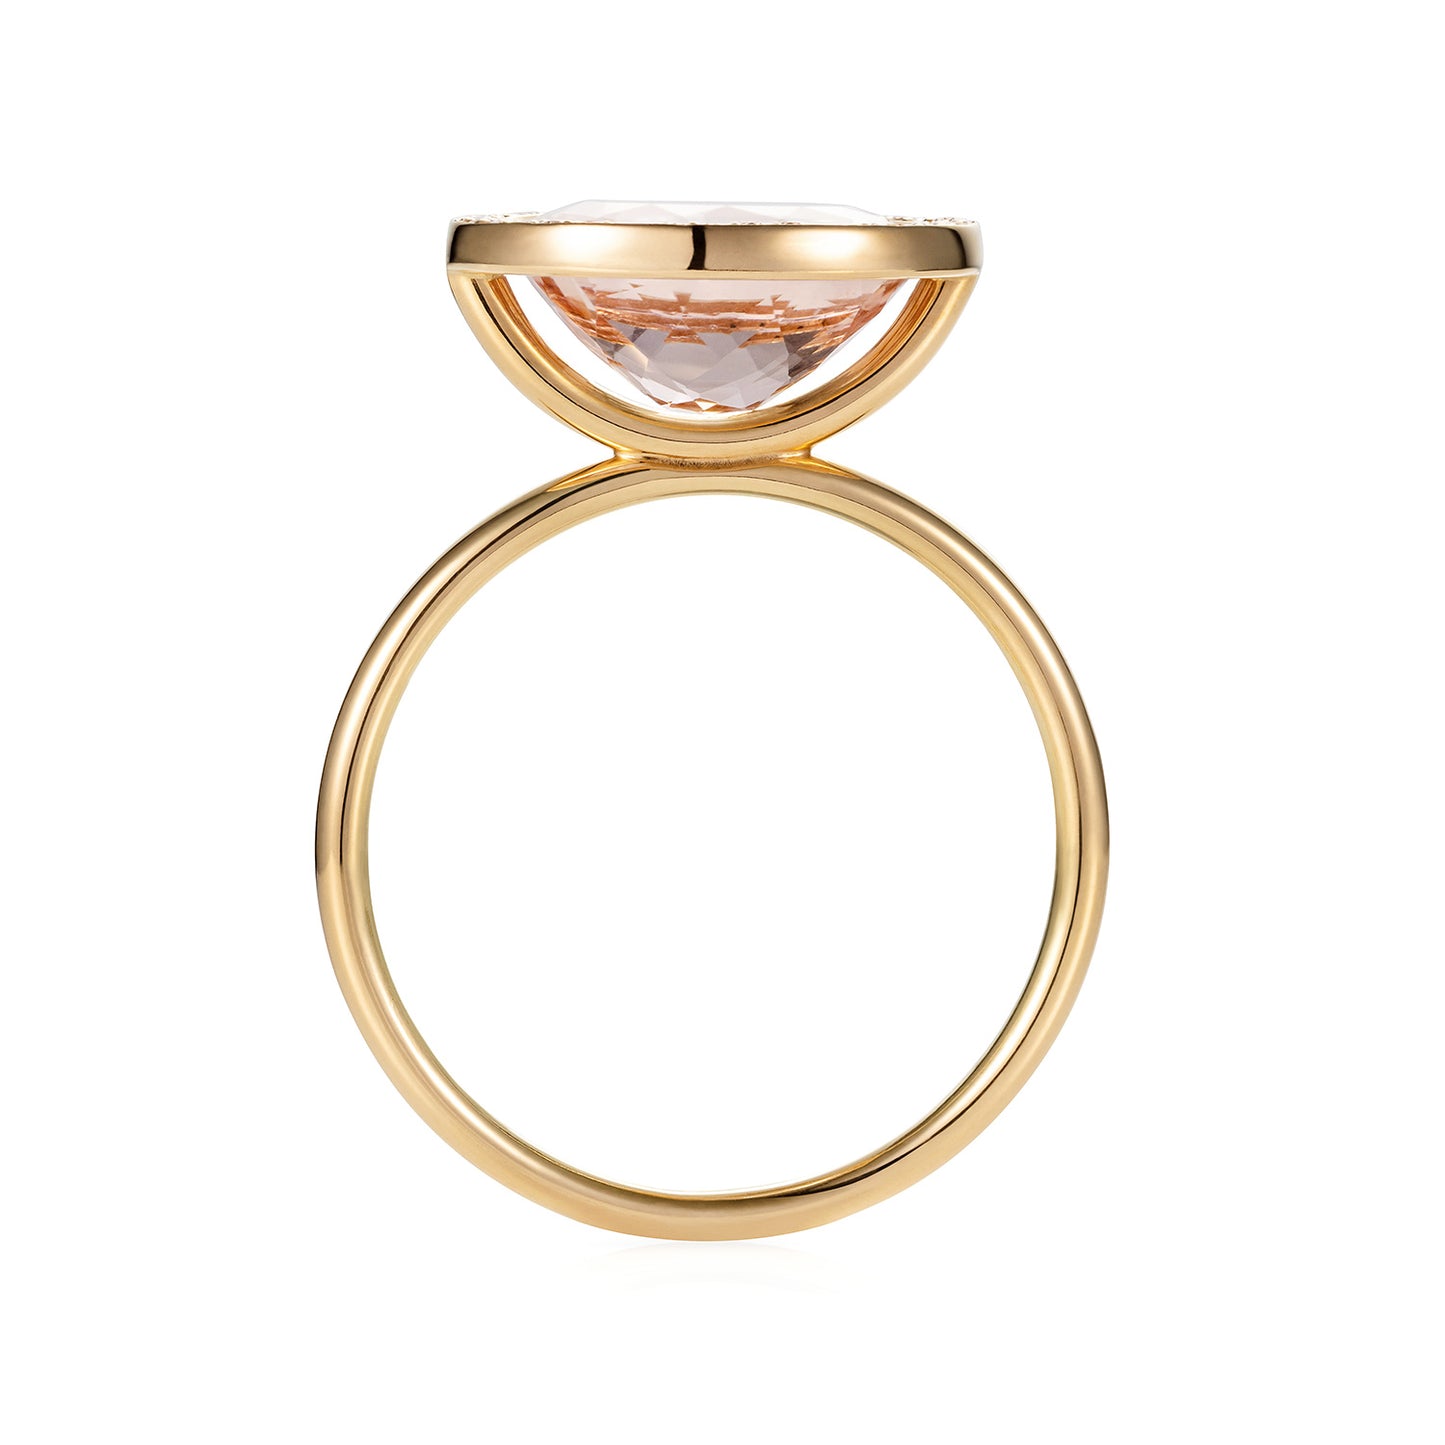 Sweet Pea 18ct yellow gold cocktail engagement ring with large, raised peach oval sapphire with a pave set diamond surround.  Edit alt text